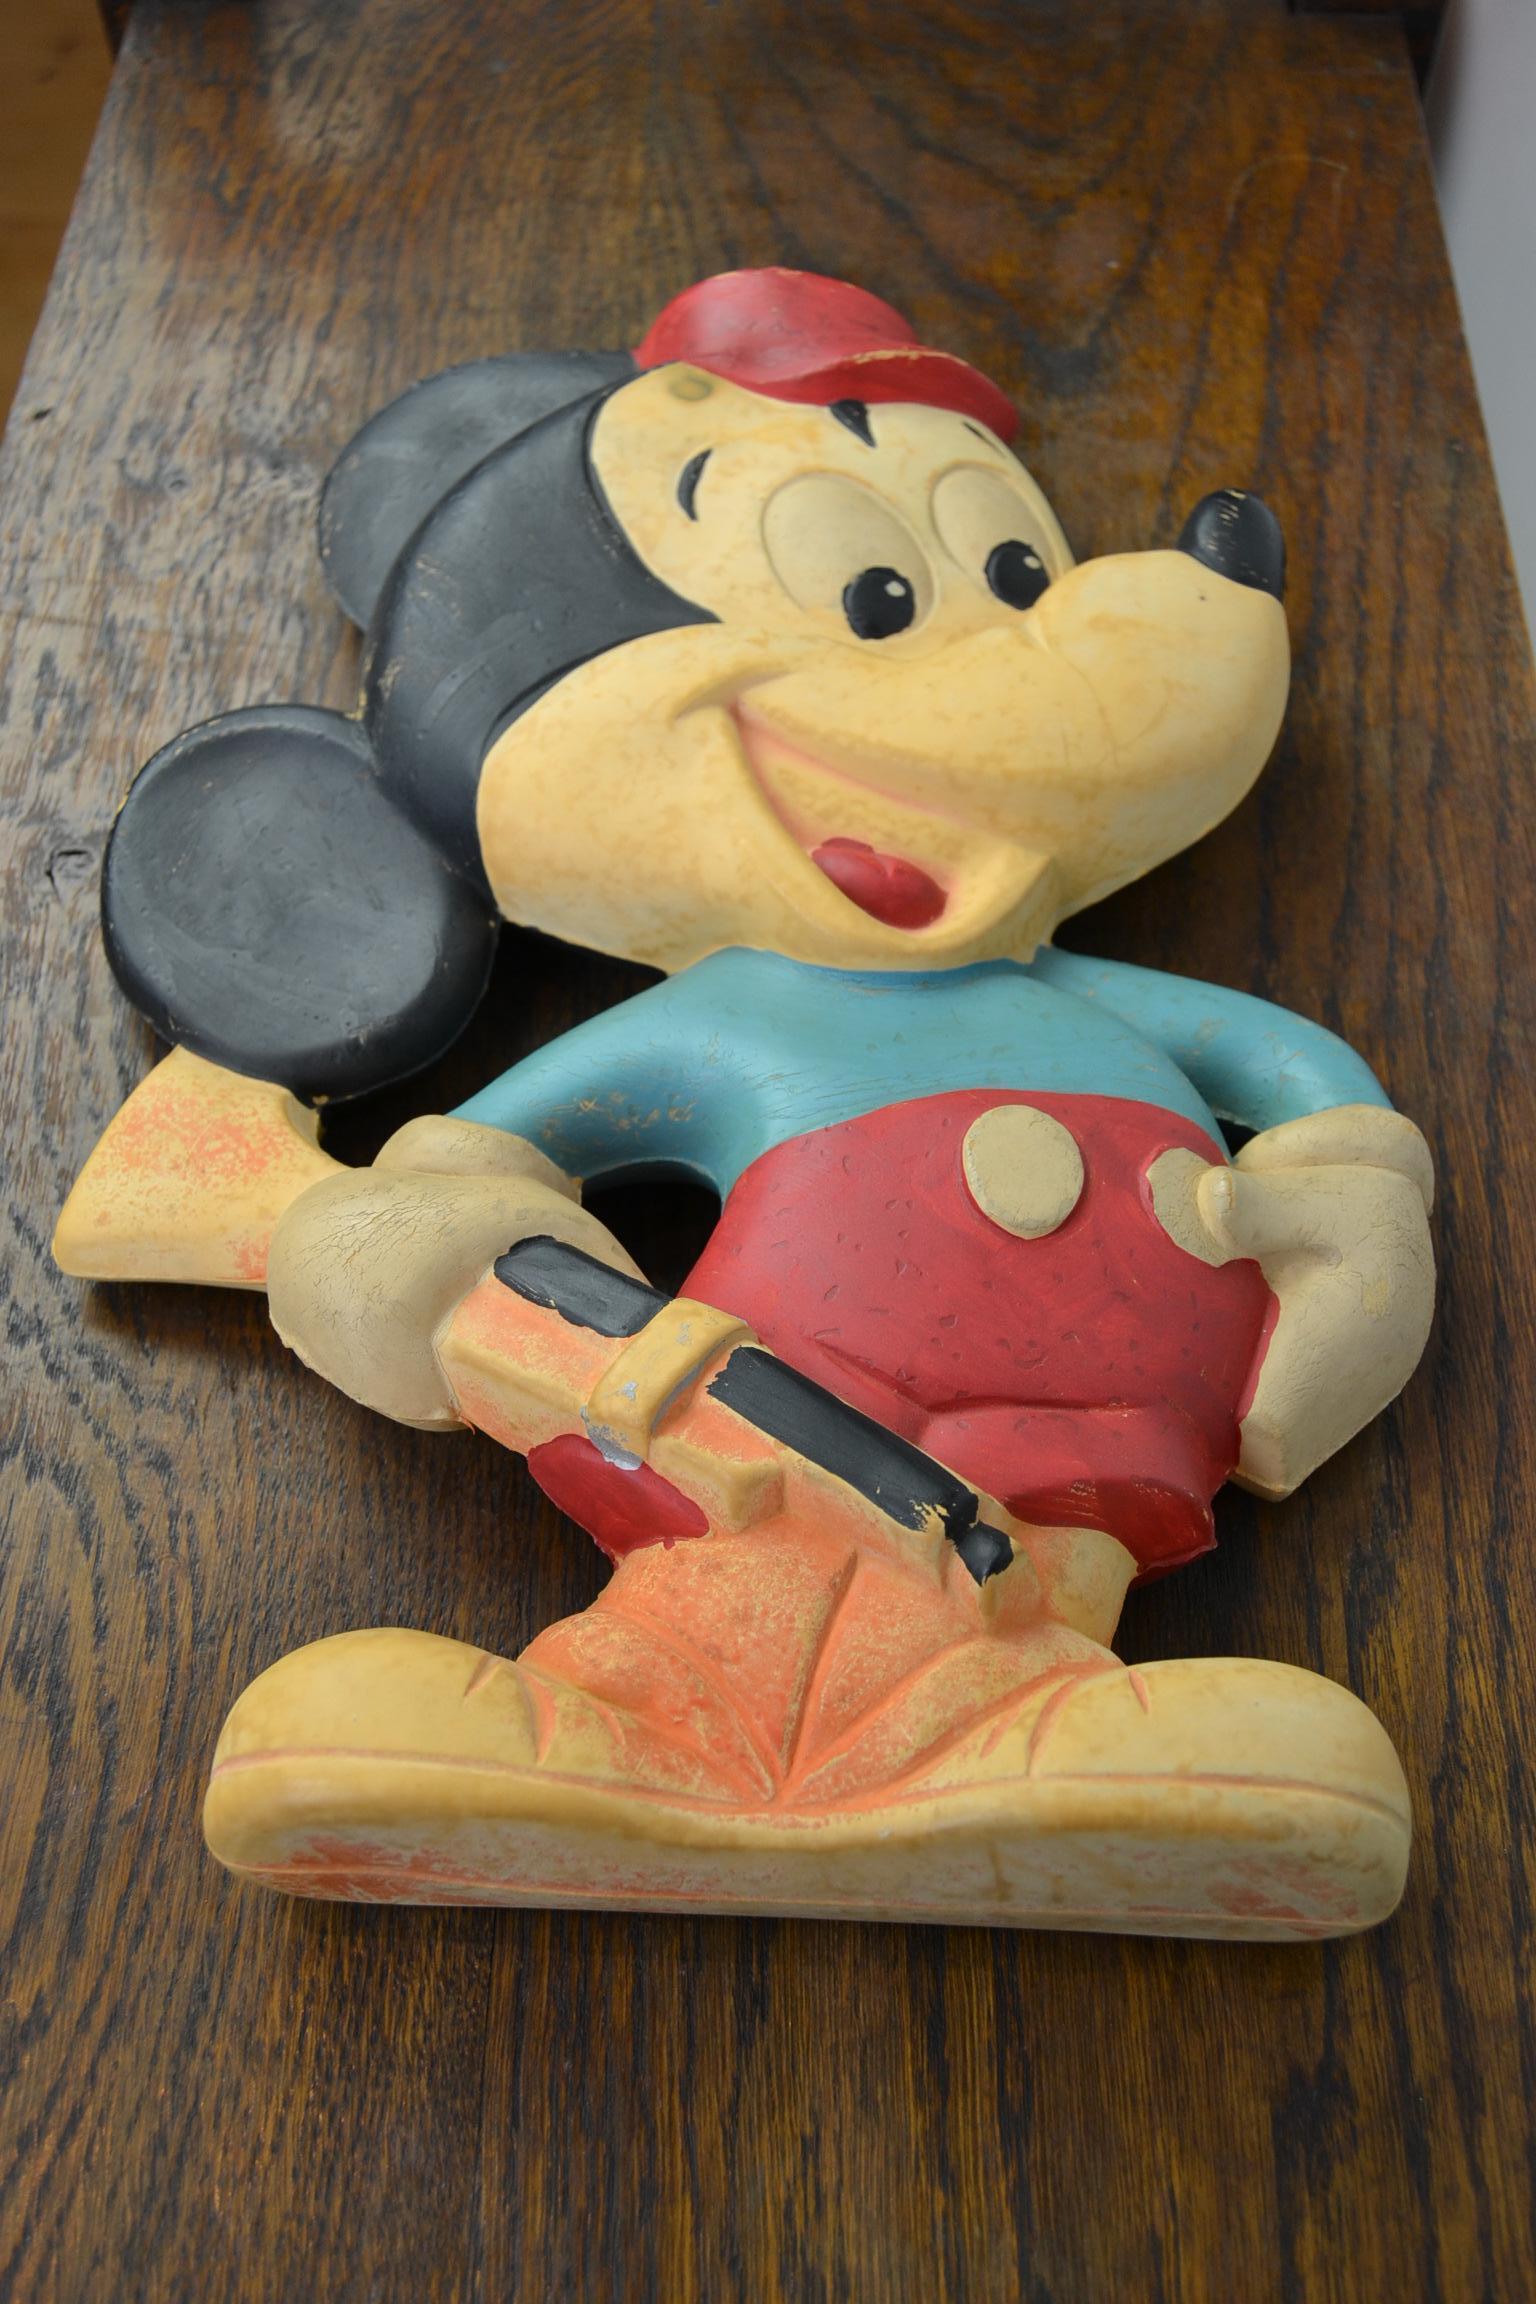 1965 Walt Disney Mickey Mouse Hot Water Bottle by Duarry Spain. 
A collectible Mickey Mouse rubber hot water bottle with original stopper.
This Walt Disney Production Mickey Mouse is made in Spain by Duarry in 1965.
Walt Disney character, Mickey